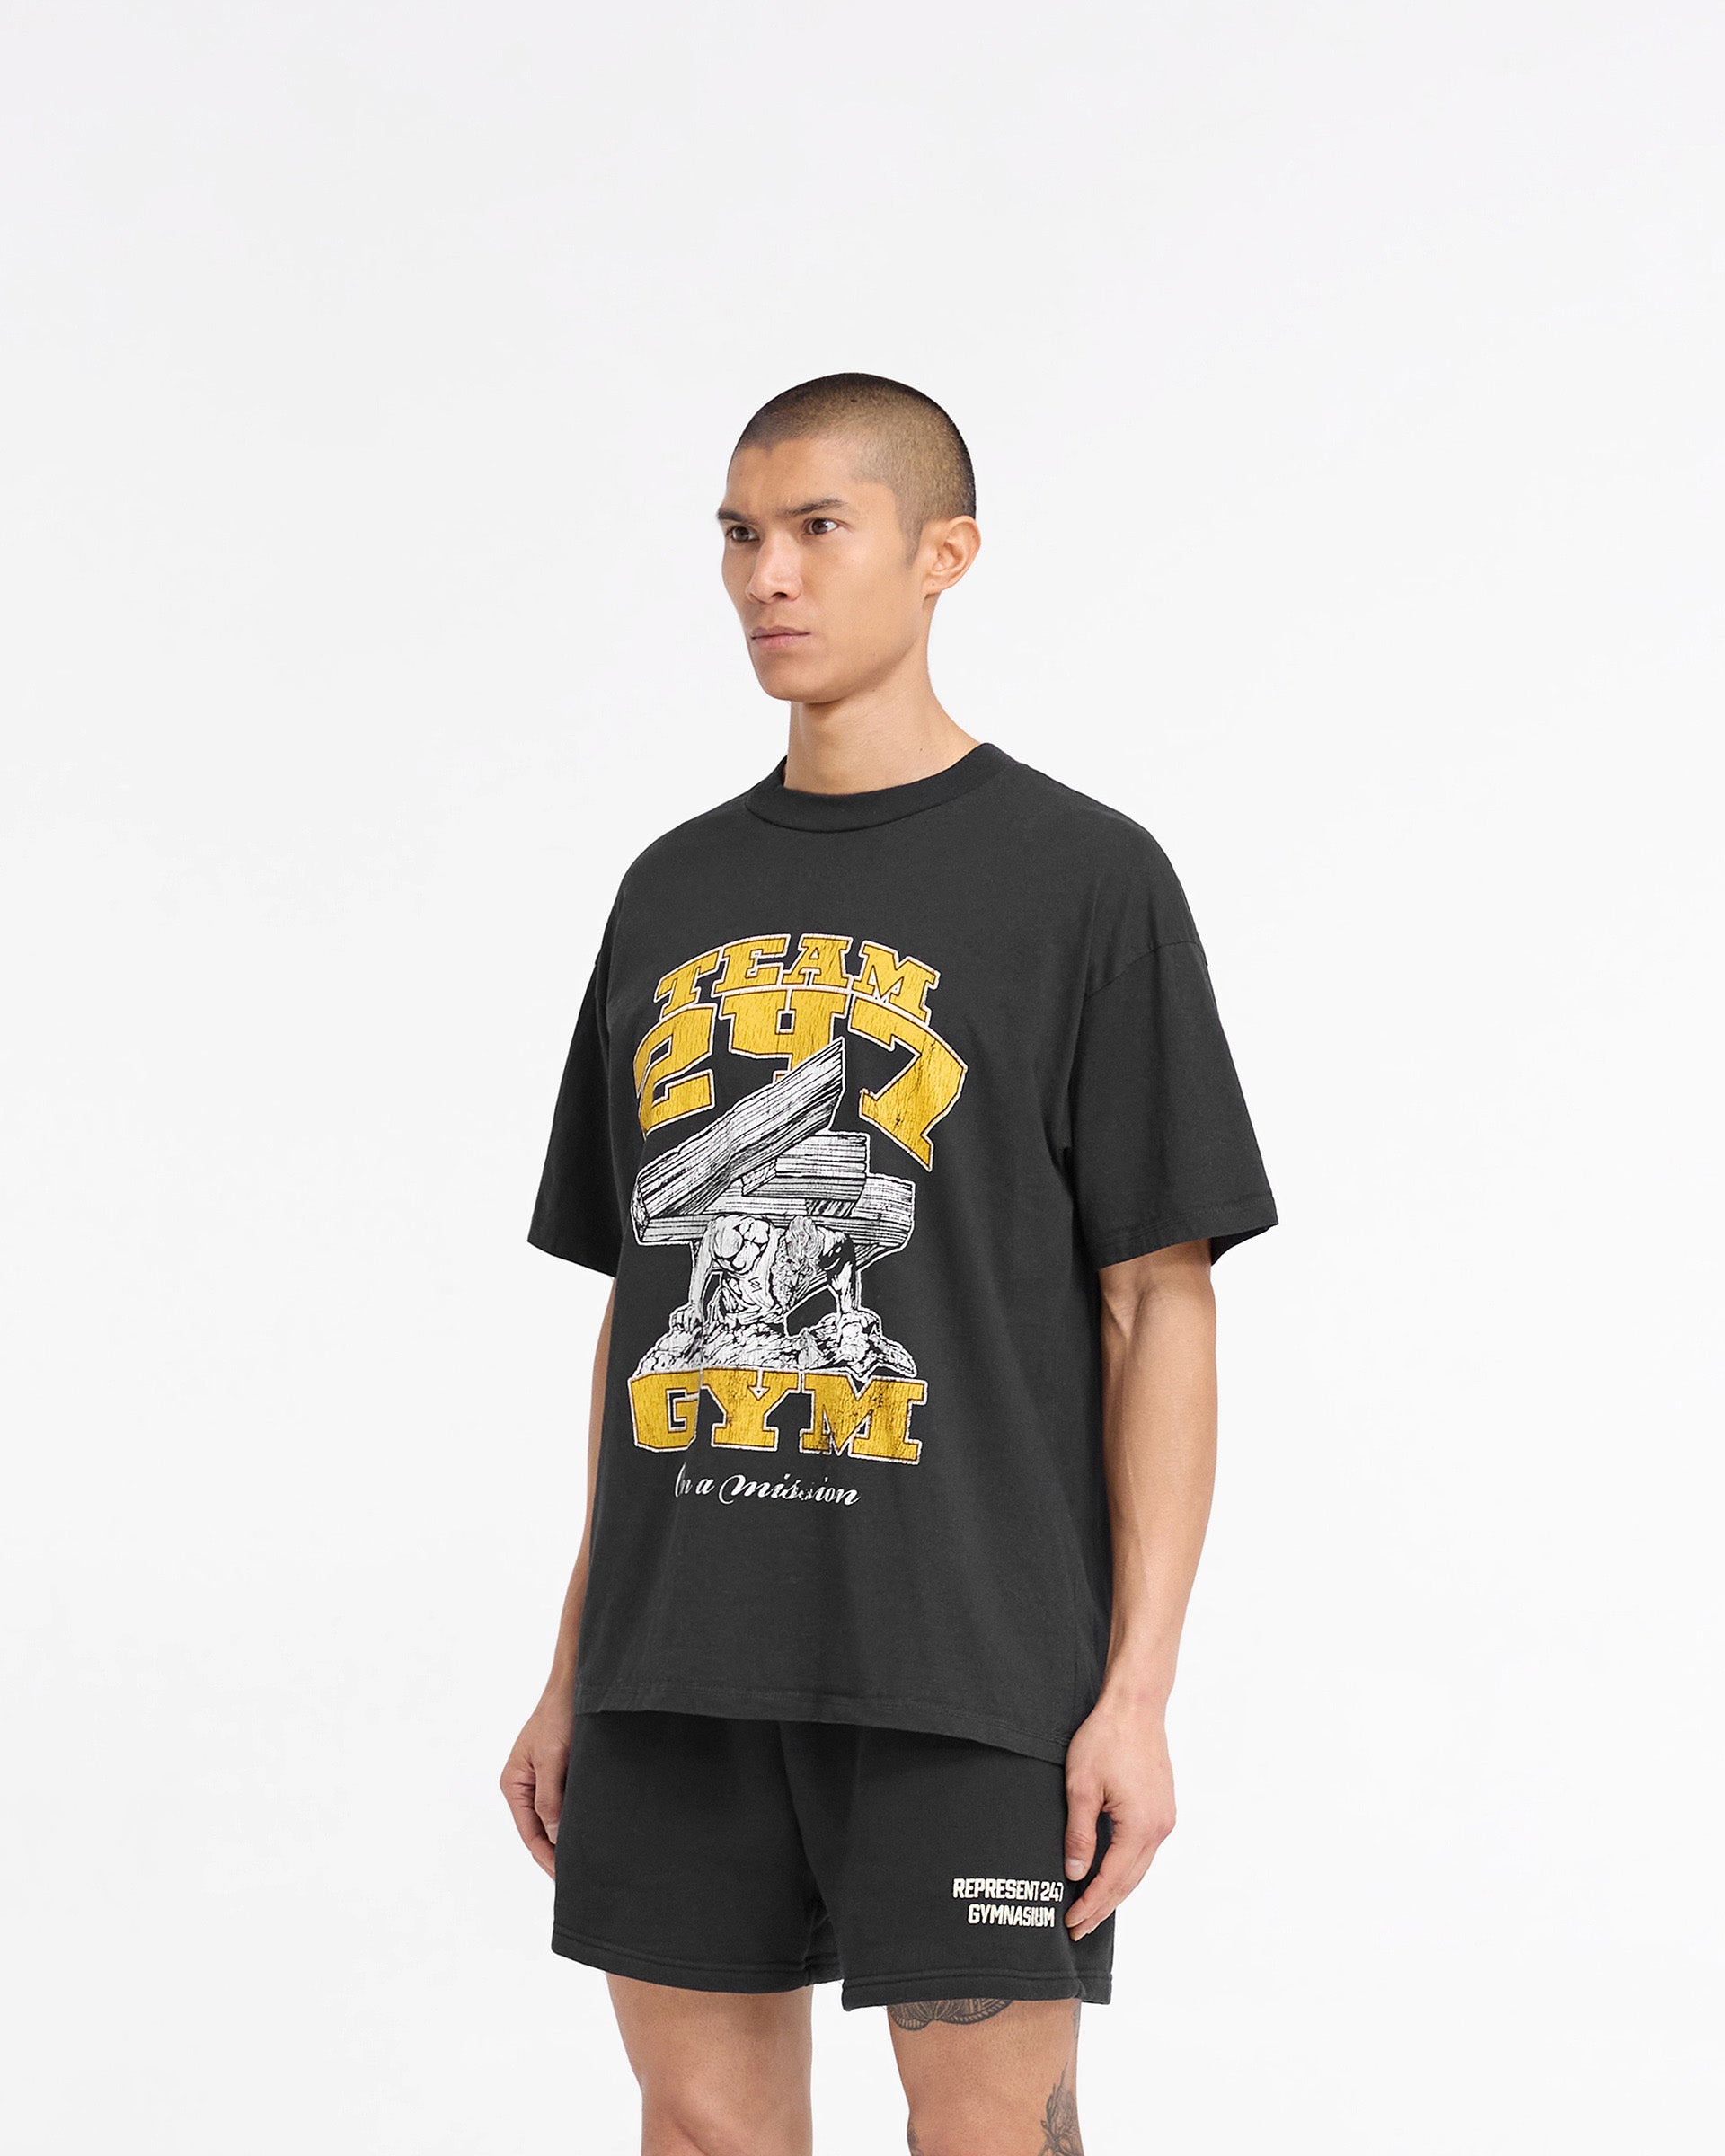 247 On His Shoulders T-Shirt - Off Black